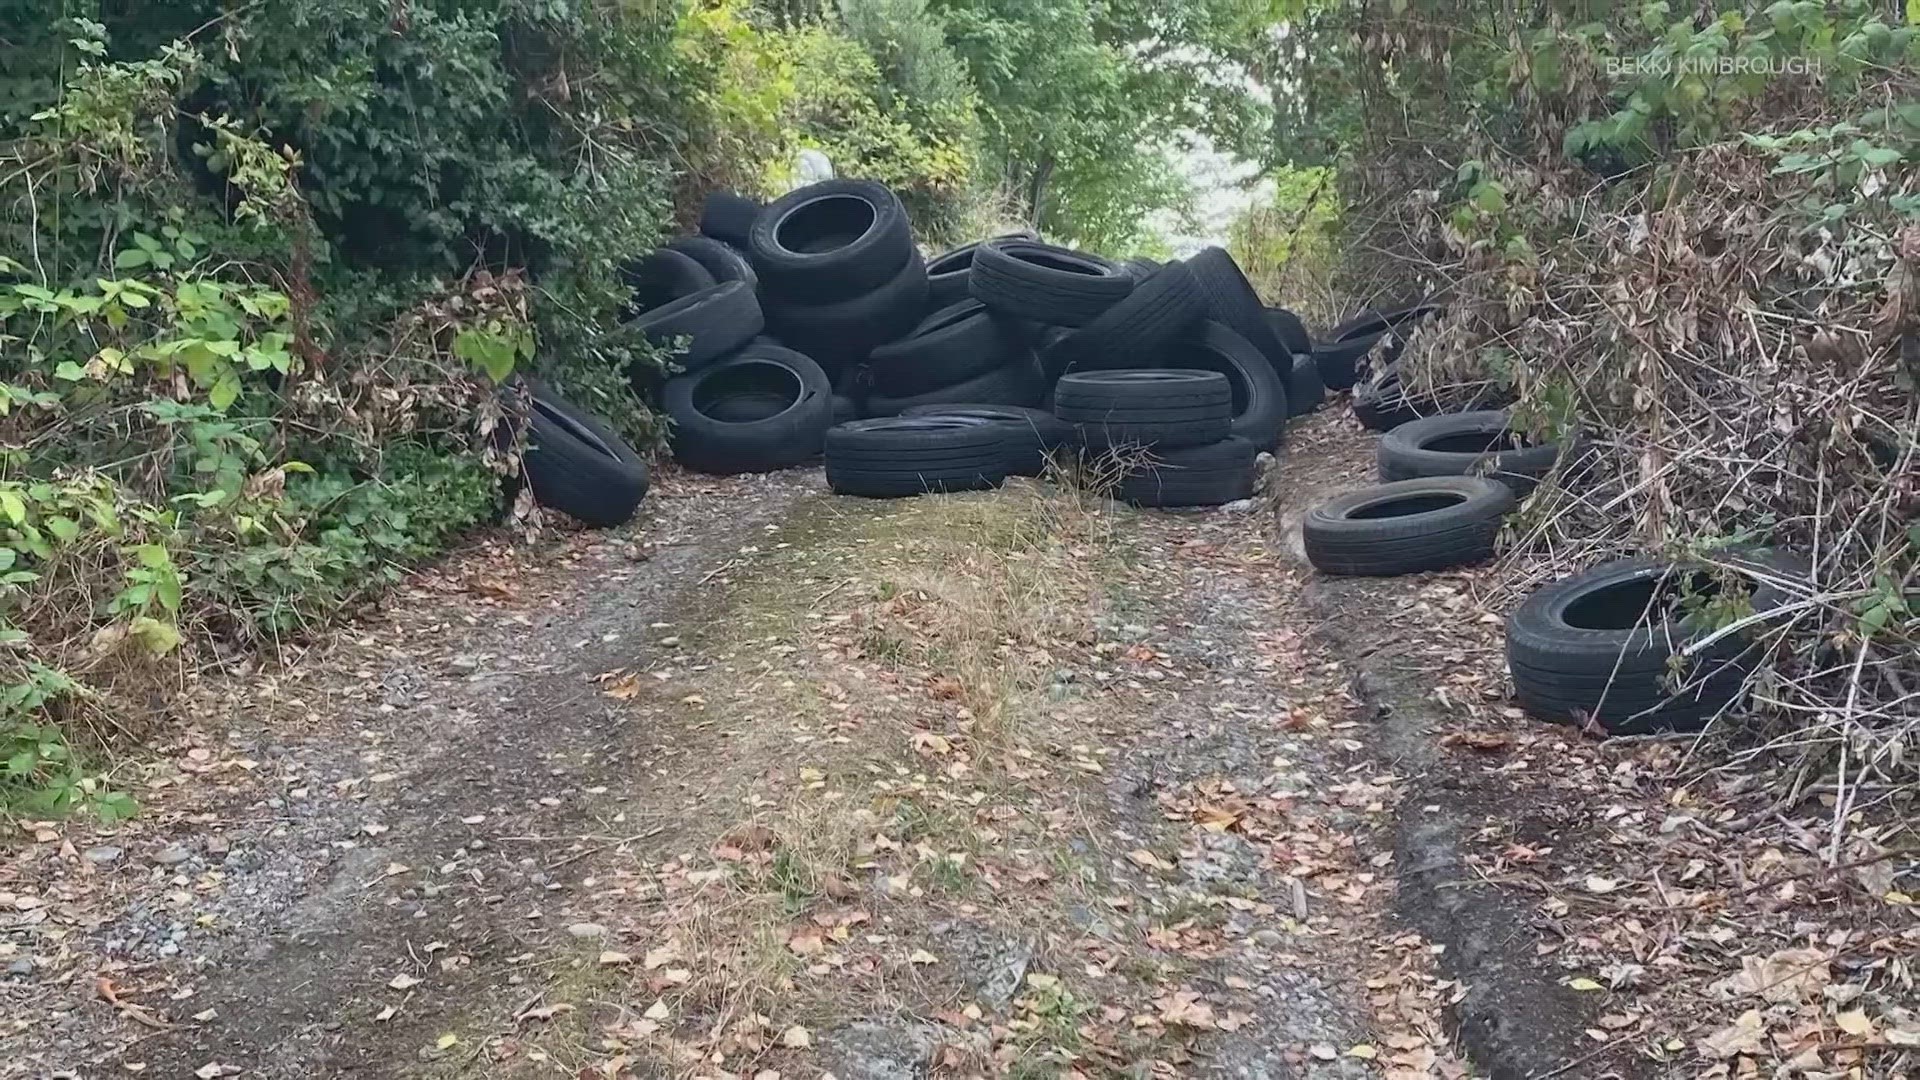 Seattle Public Utilities has collected and disposed of over 2,400 tires this month. There's still hundreds waiting to be removed.